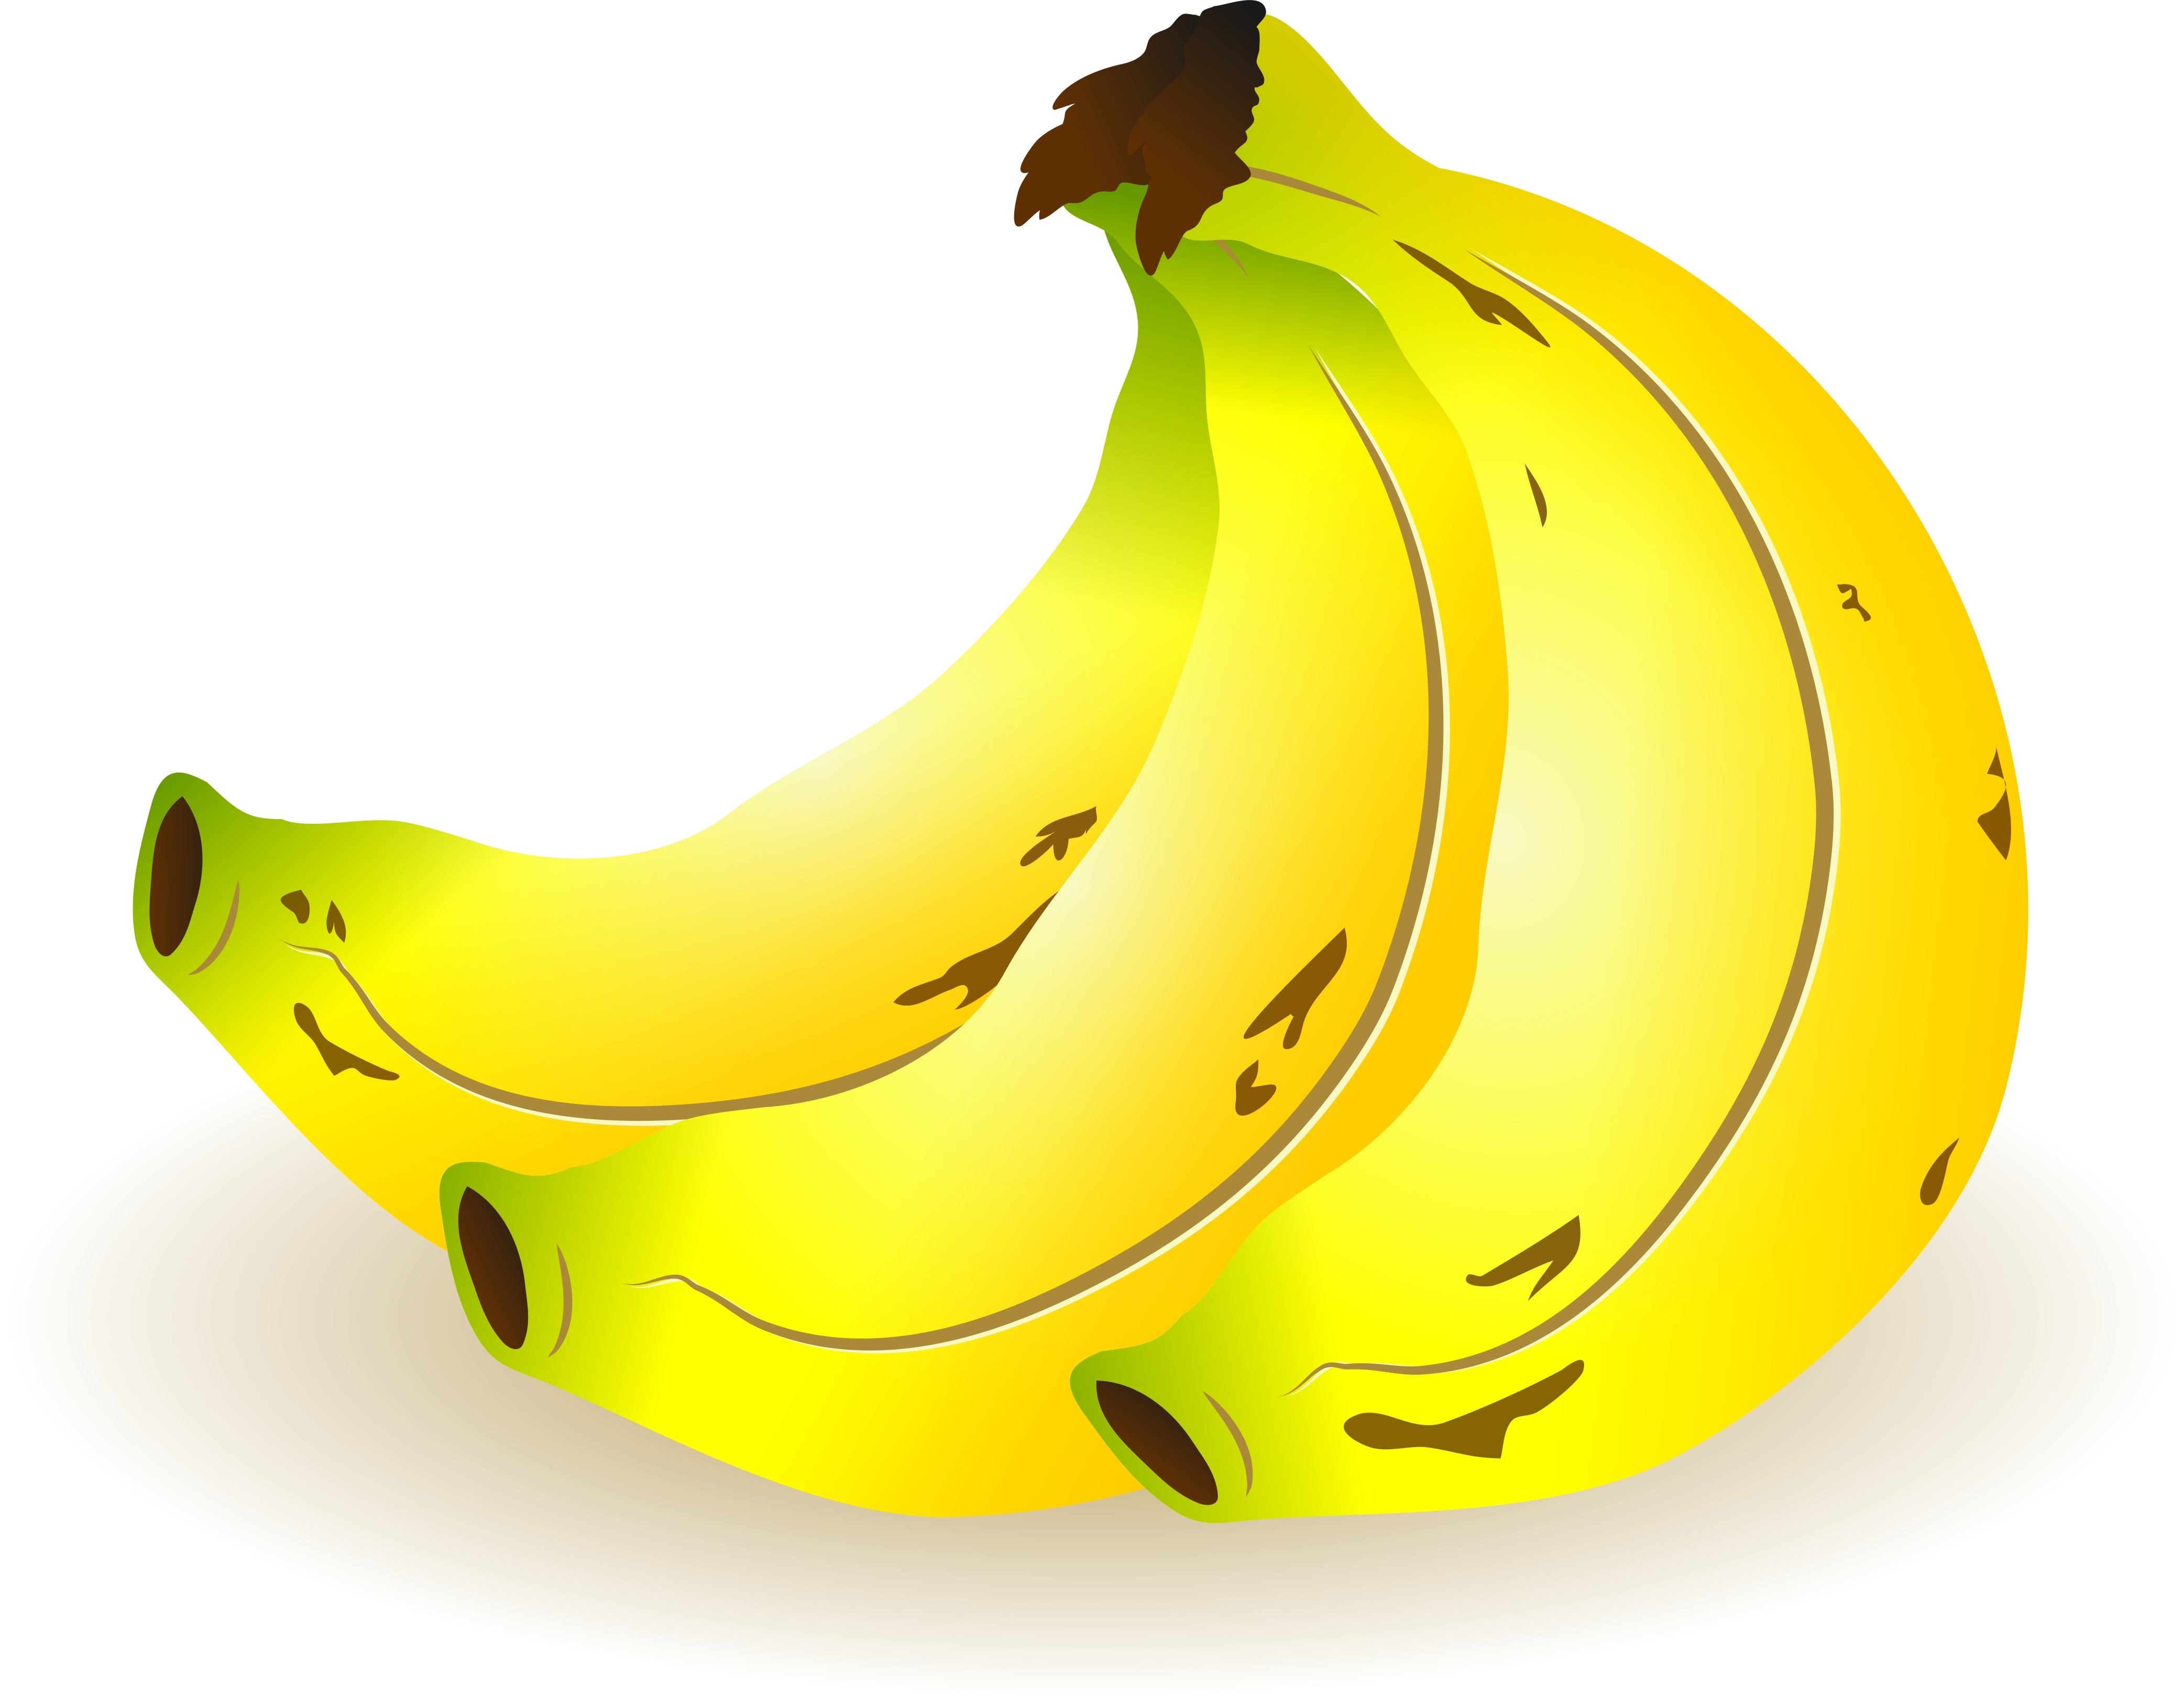 Clip Arts Related To : banana clip art. view all Cartoon Pictures Of Banana...